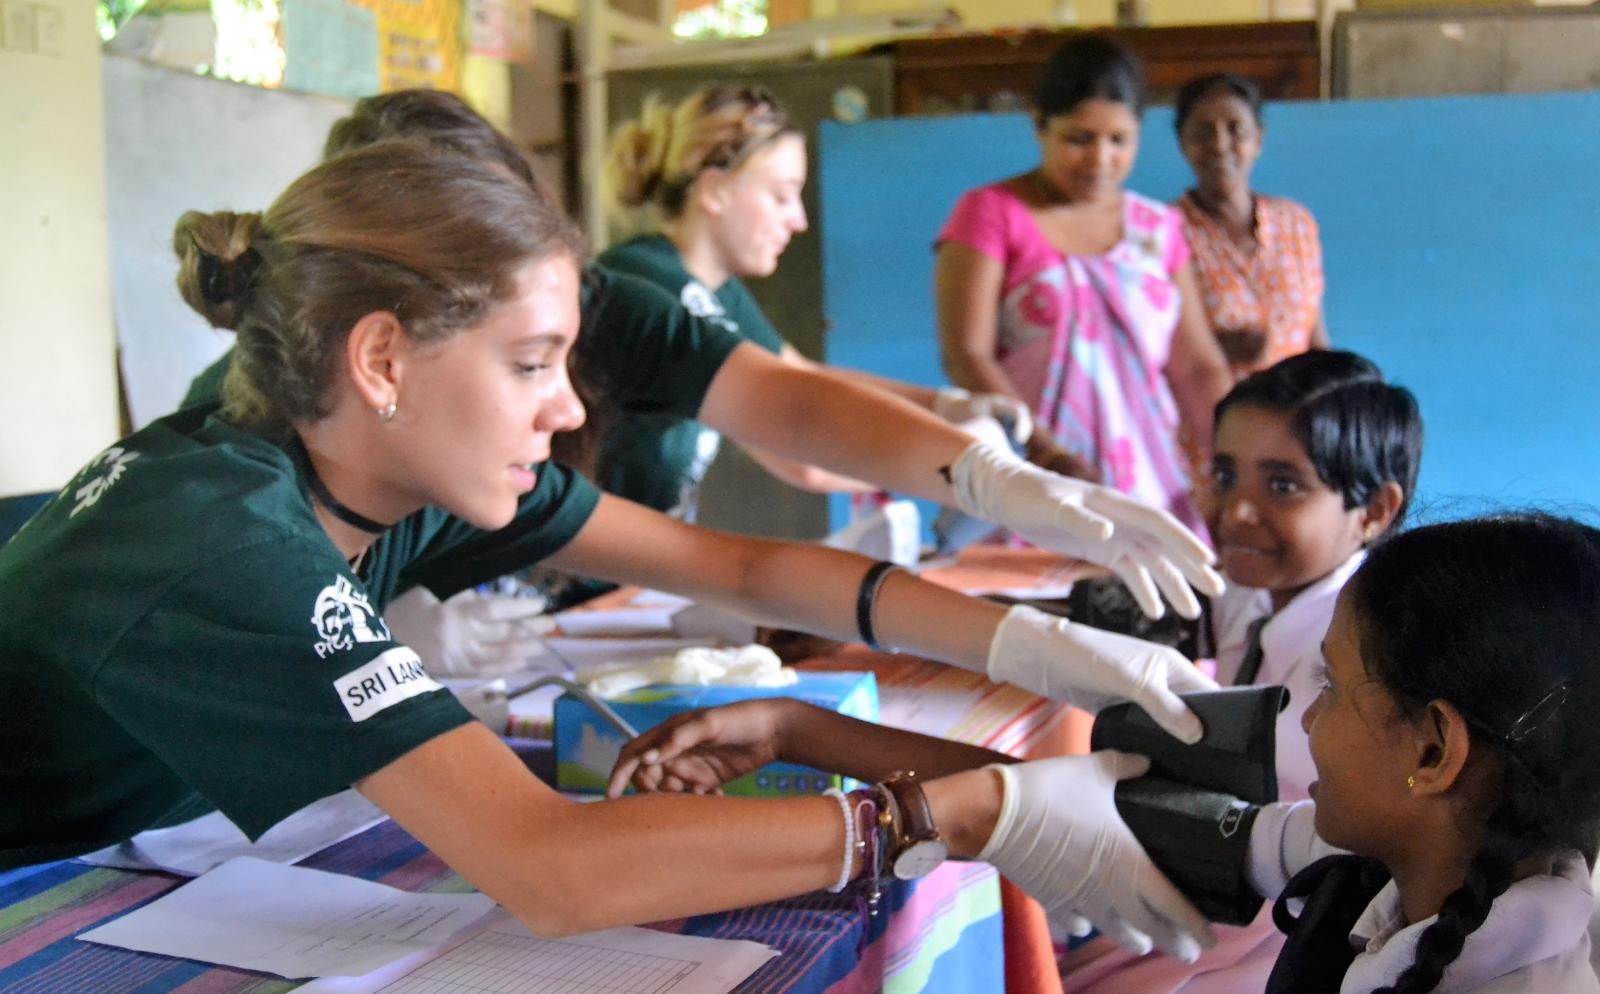 During her high school volunteer trip abroad, a Public Health volunteer measures blood pressure in a medical outreach.